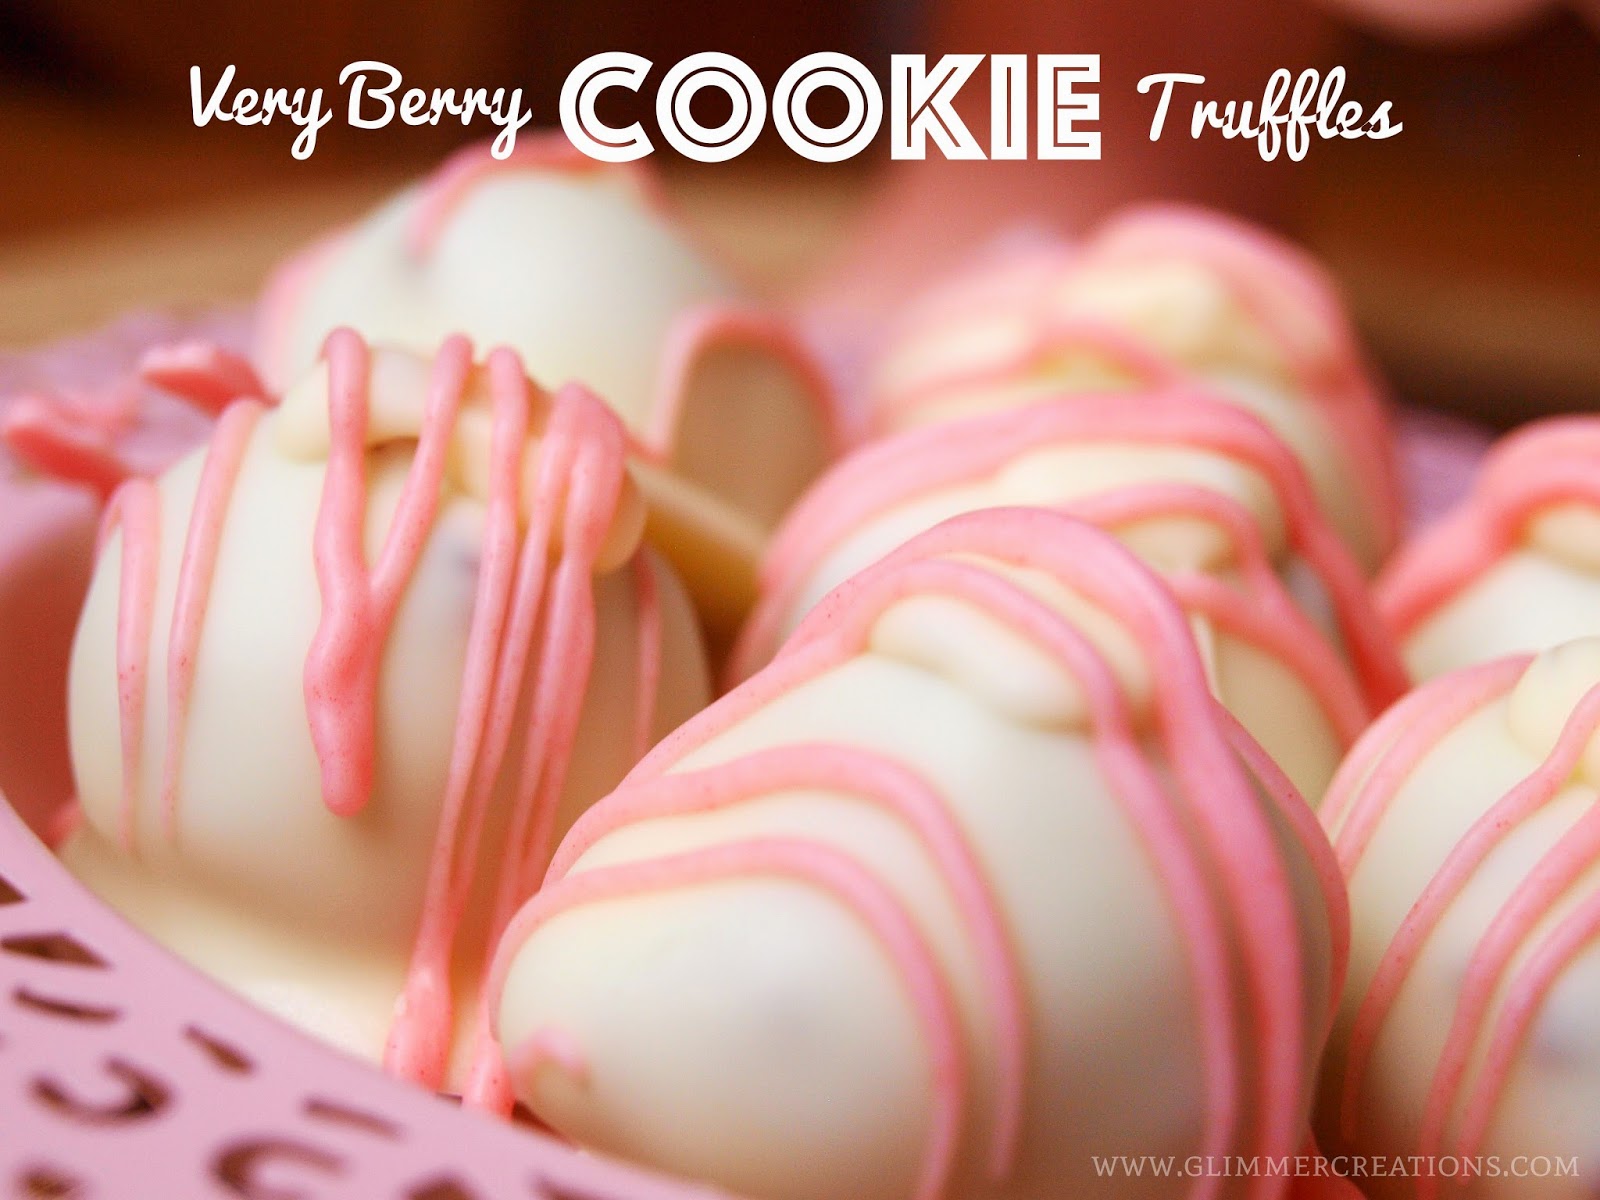 Very Berry Cookie Truffles recipe made with Oreo cookies from www.glimmercreations.com